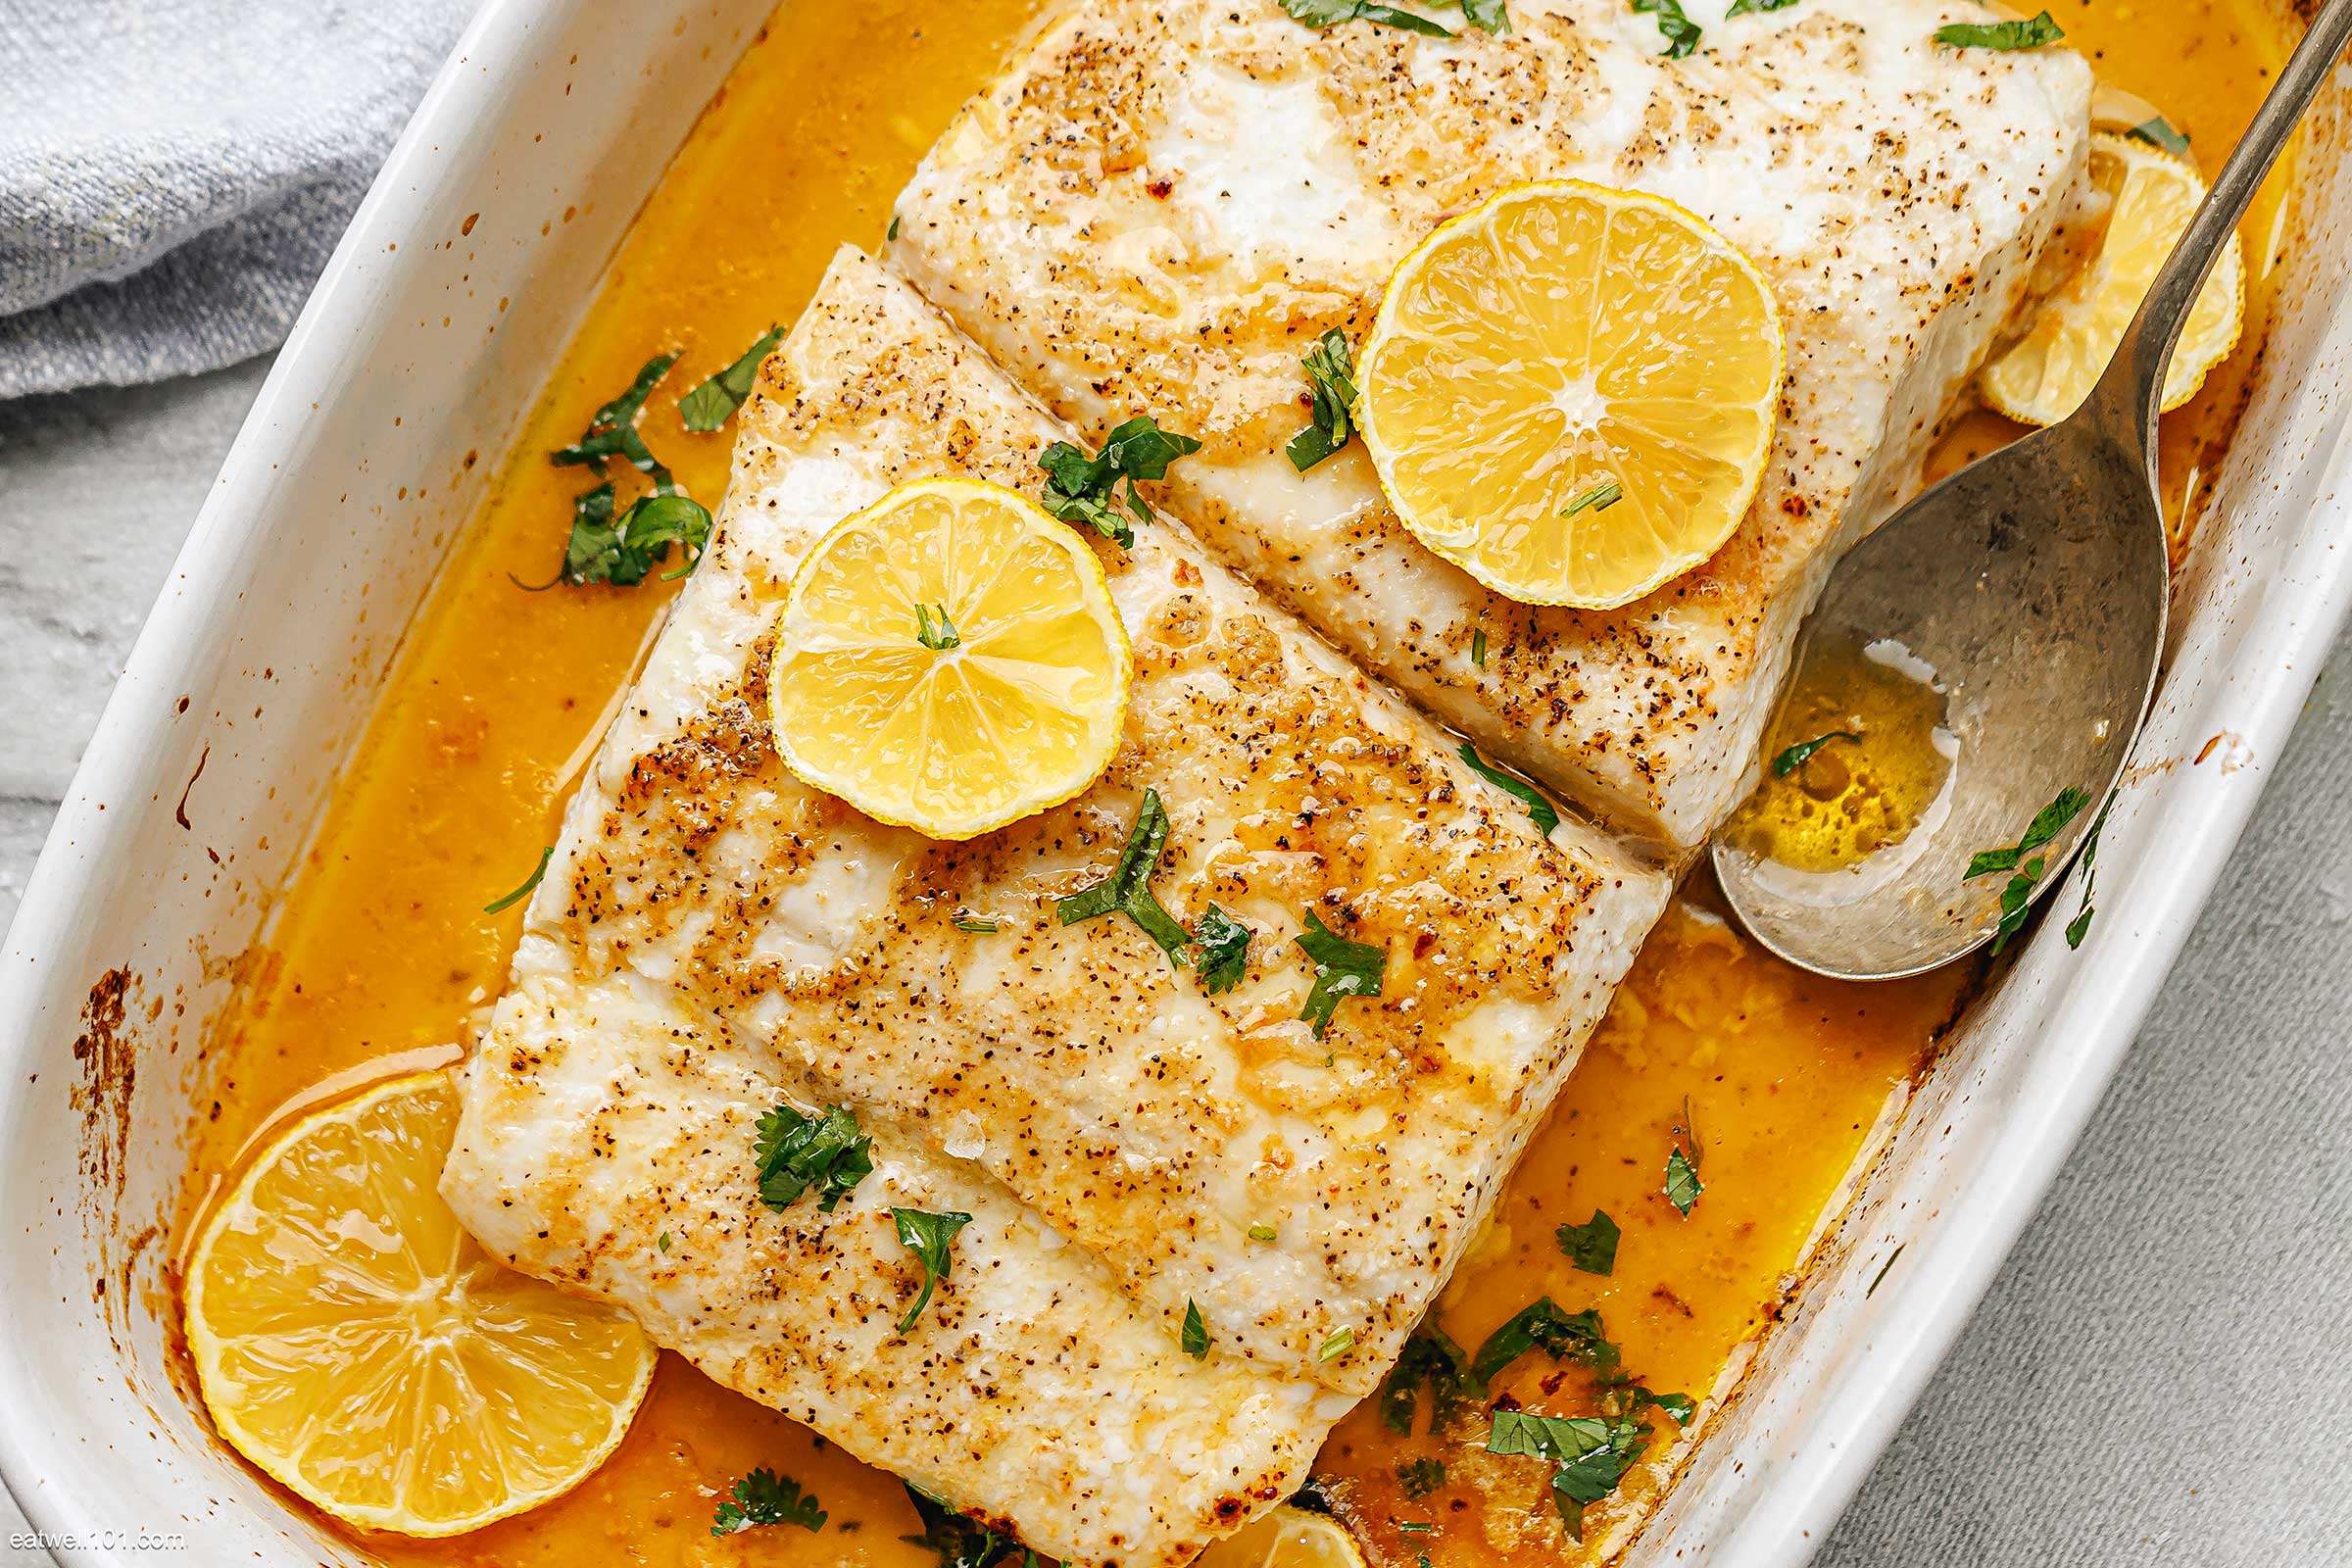 Baked Fish with Lemon Butter